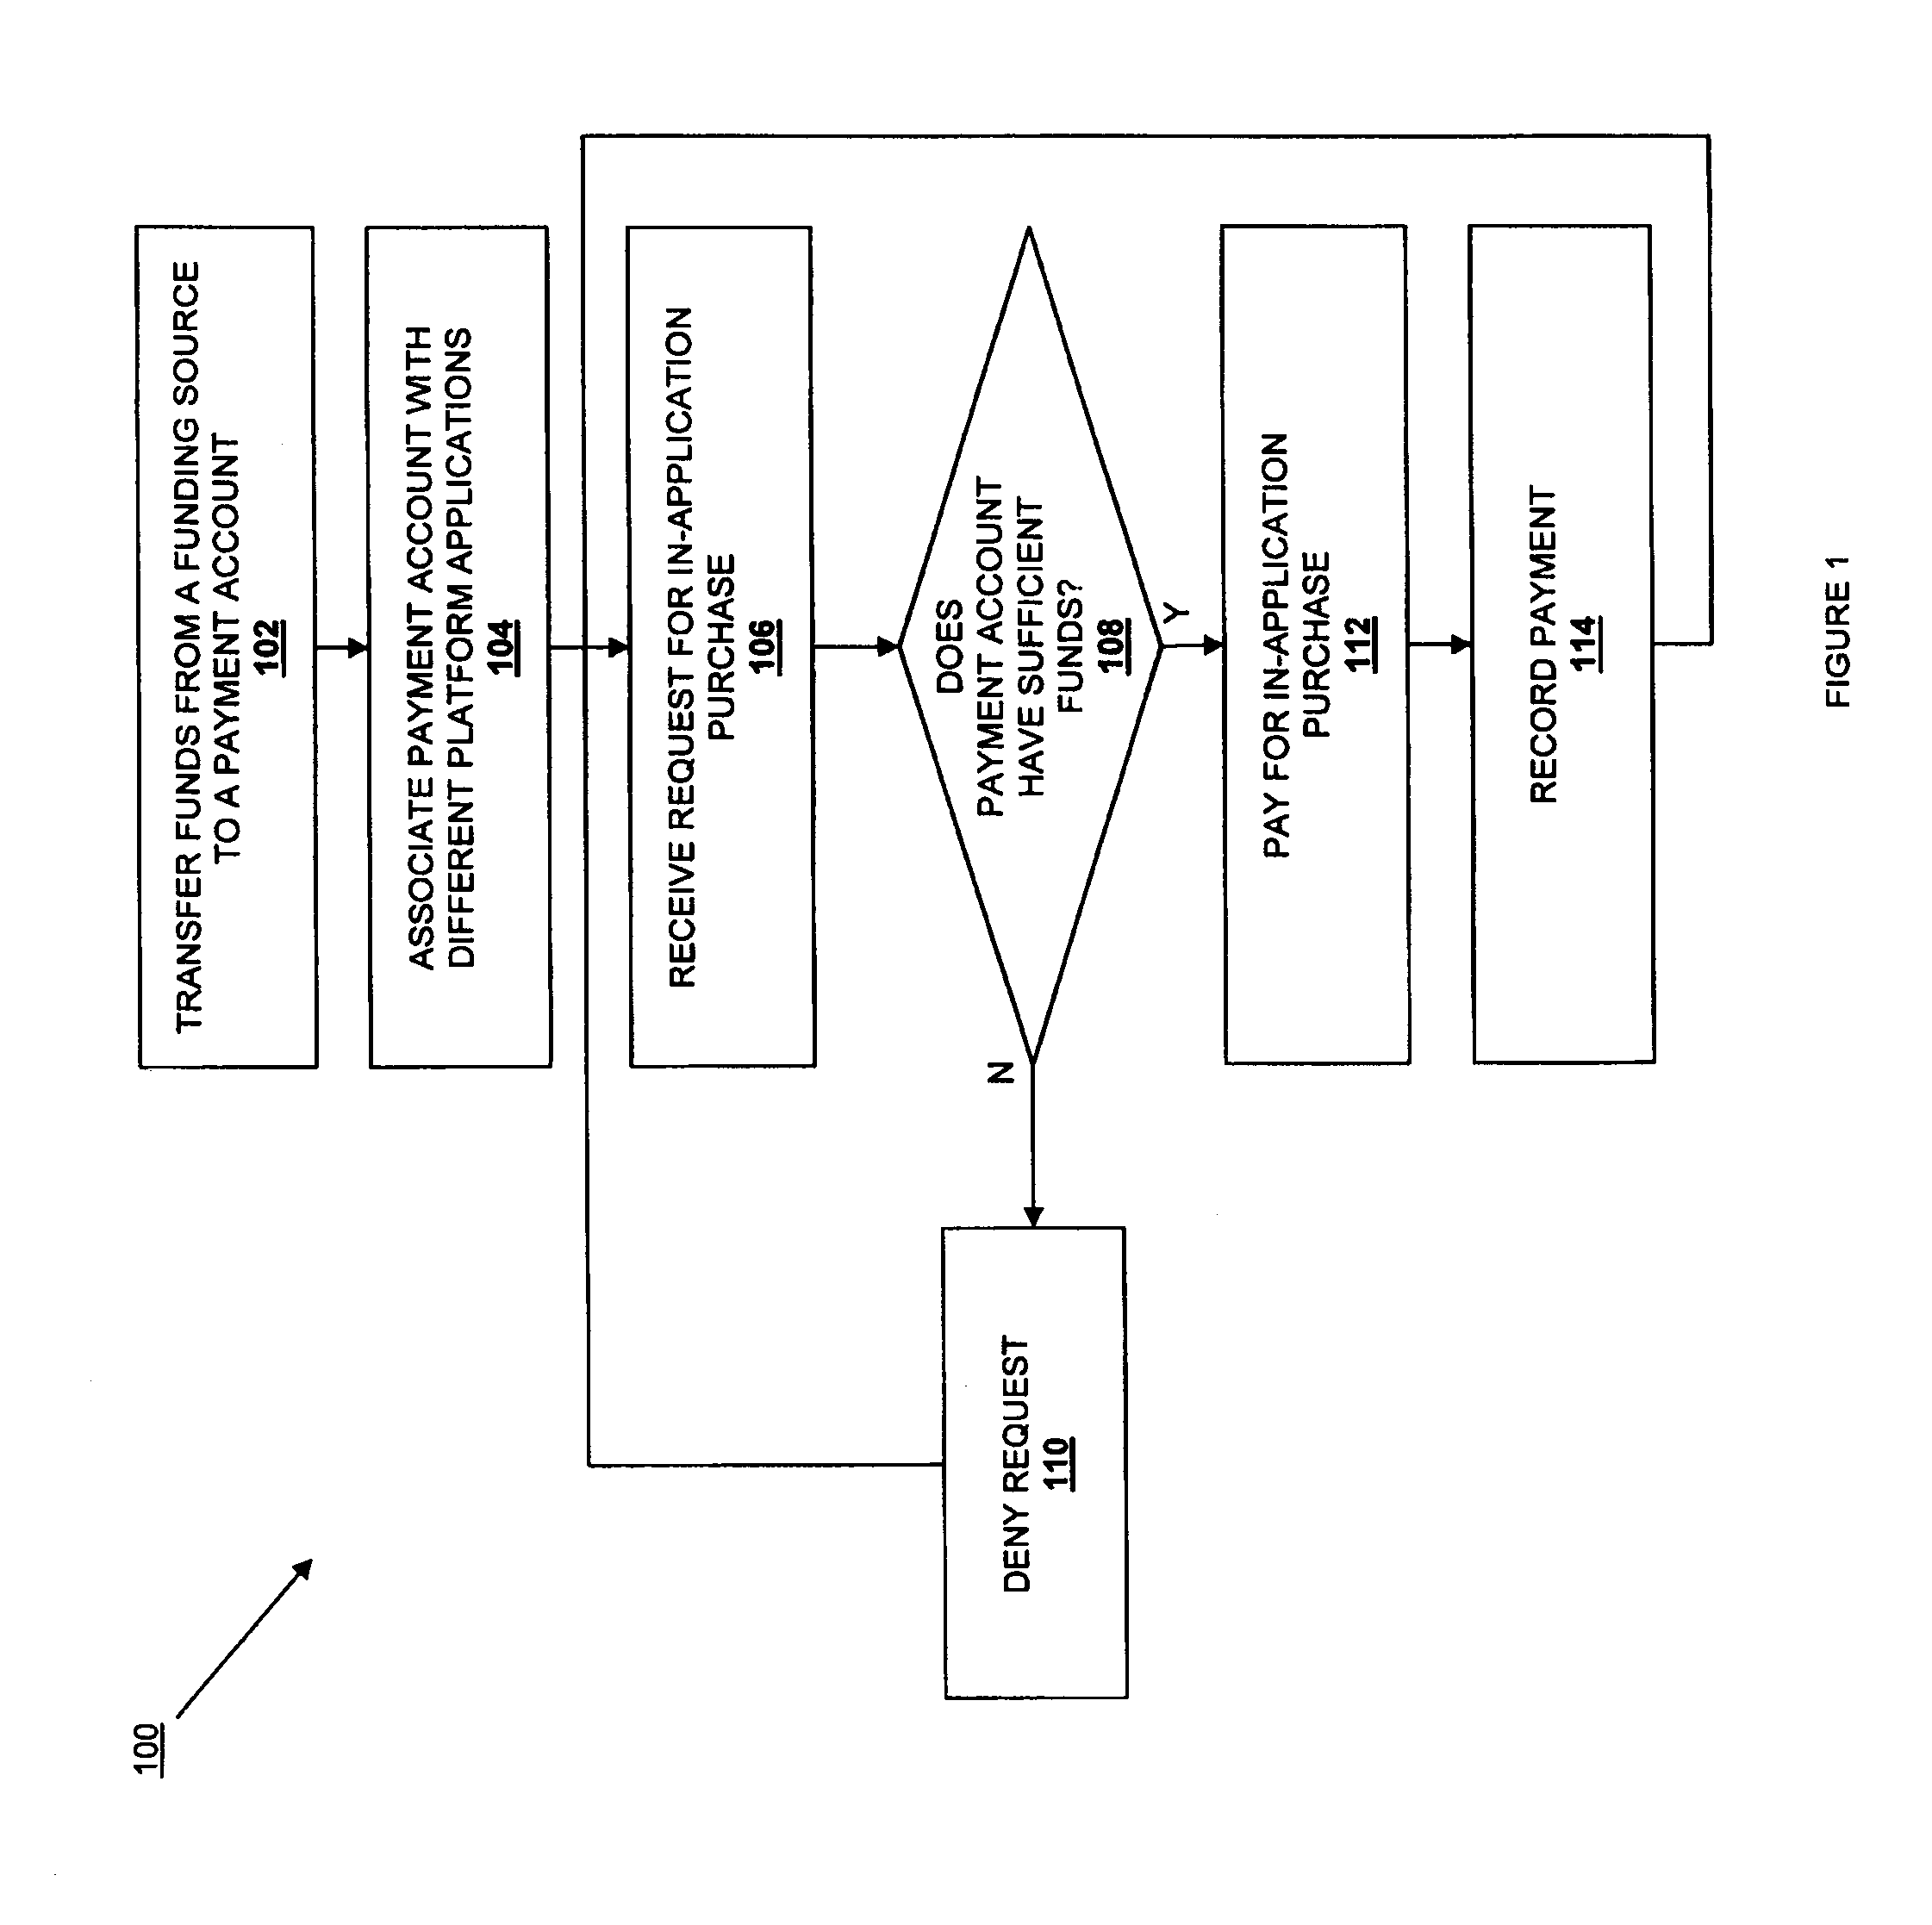 Multi-platform in-application payment system